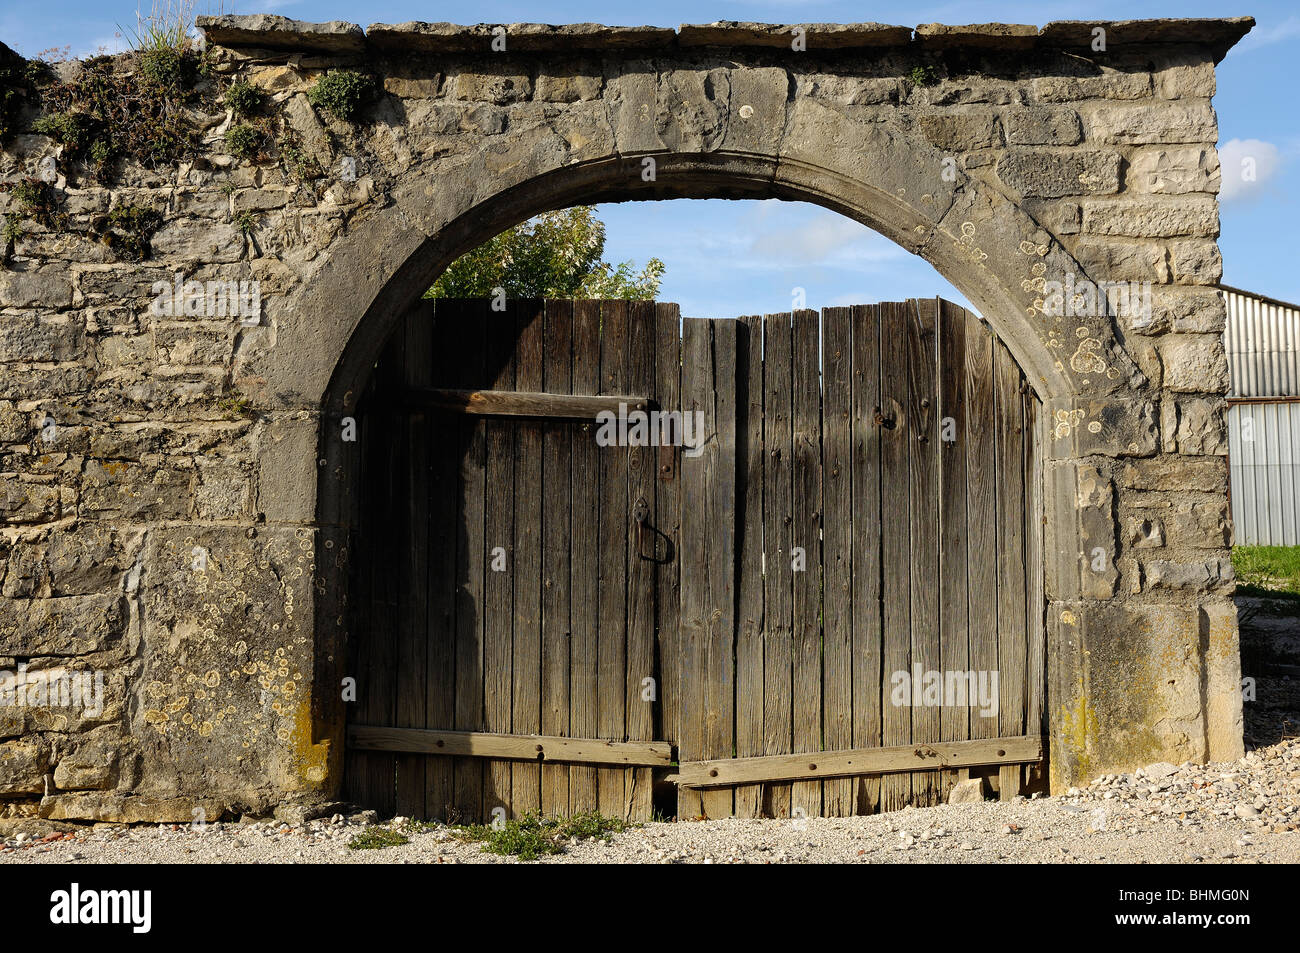 old gates in a stone arch way wood wooden wall Stock Photo